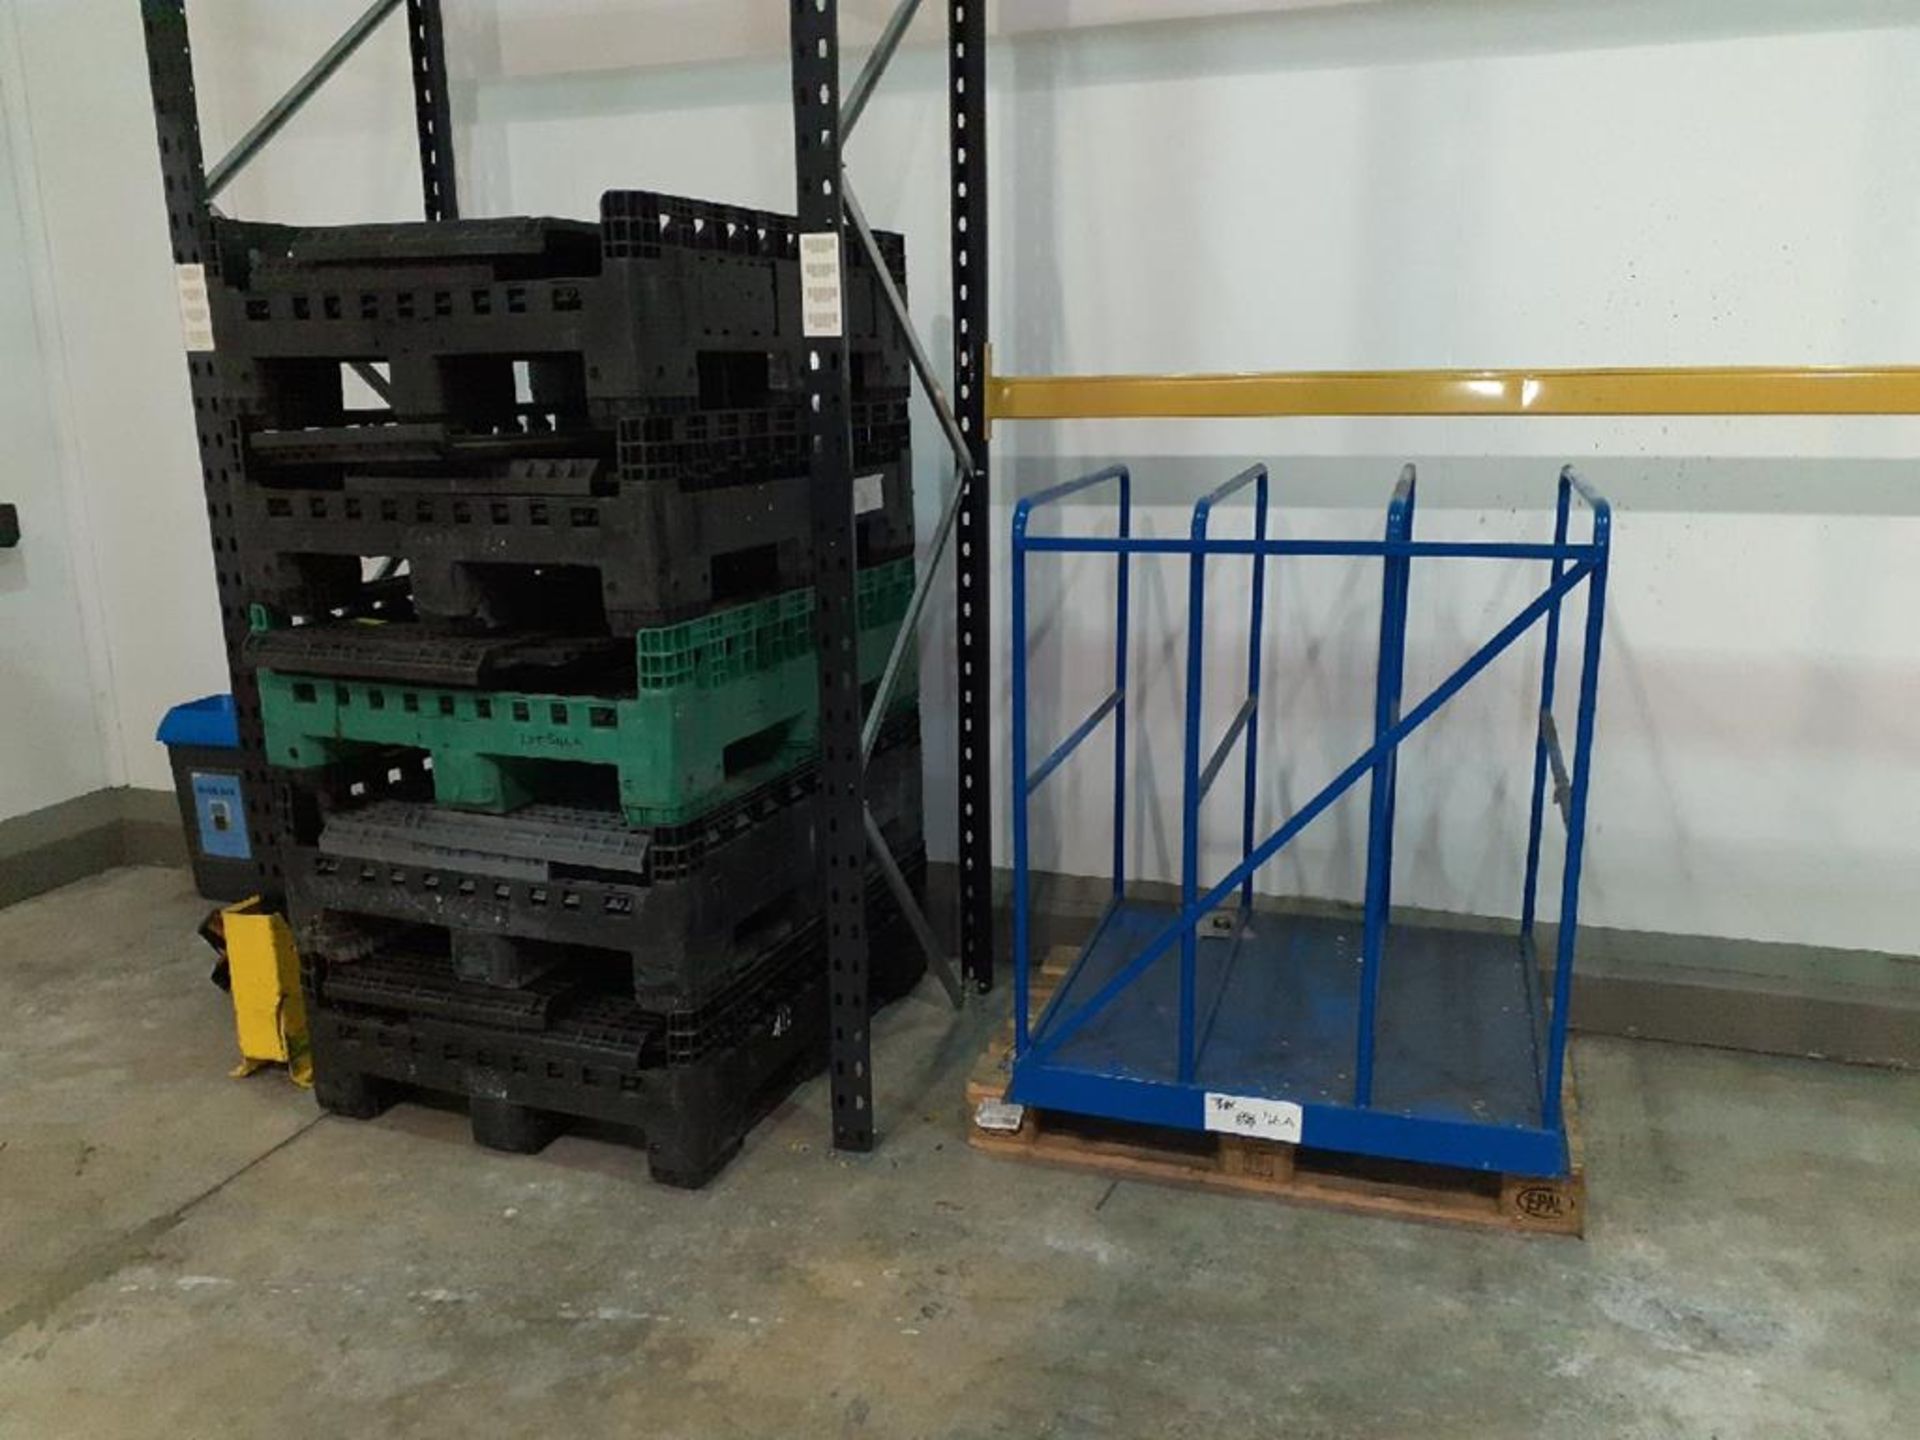 5x plastic pallets and a steel storage rack